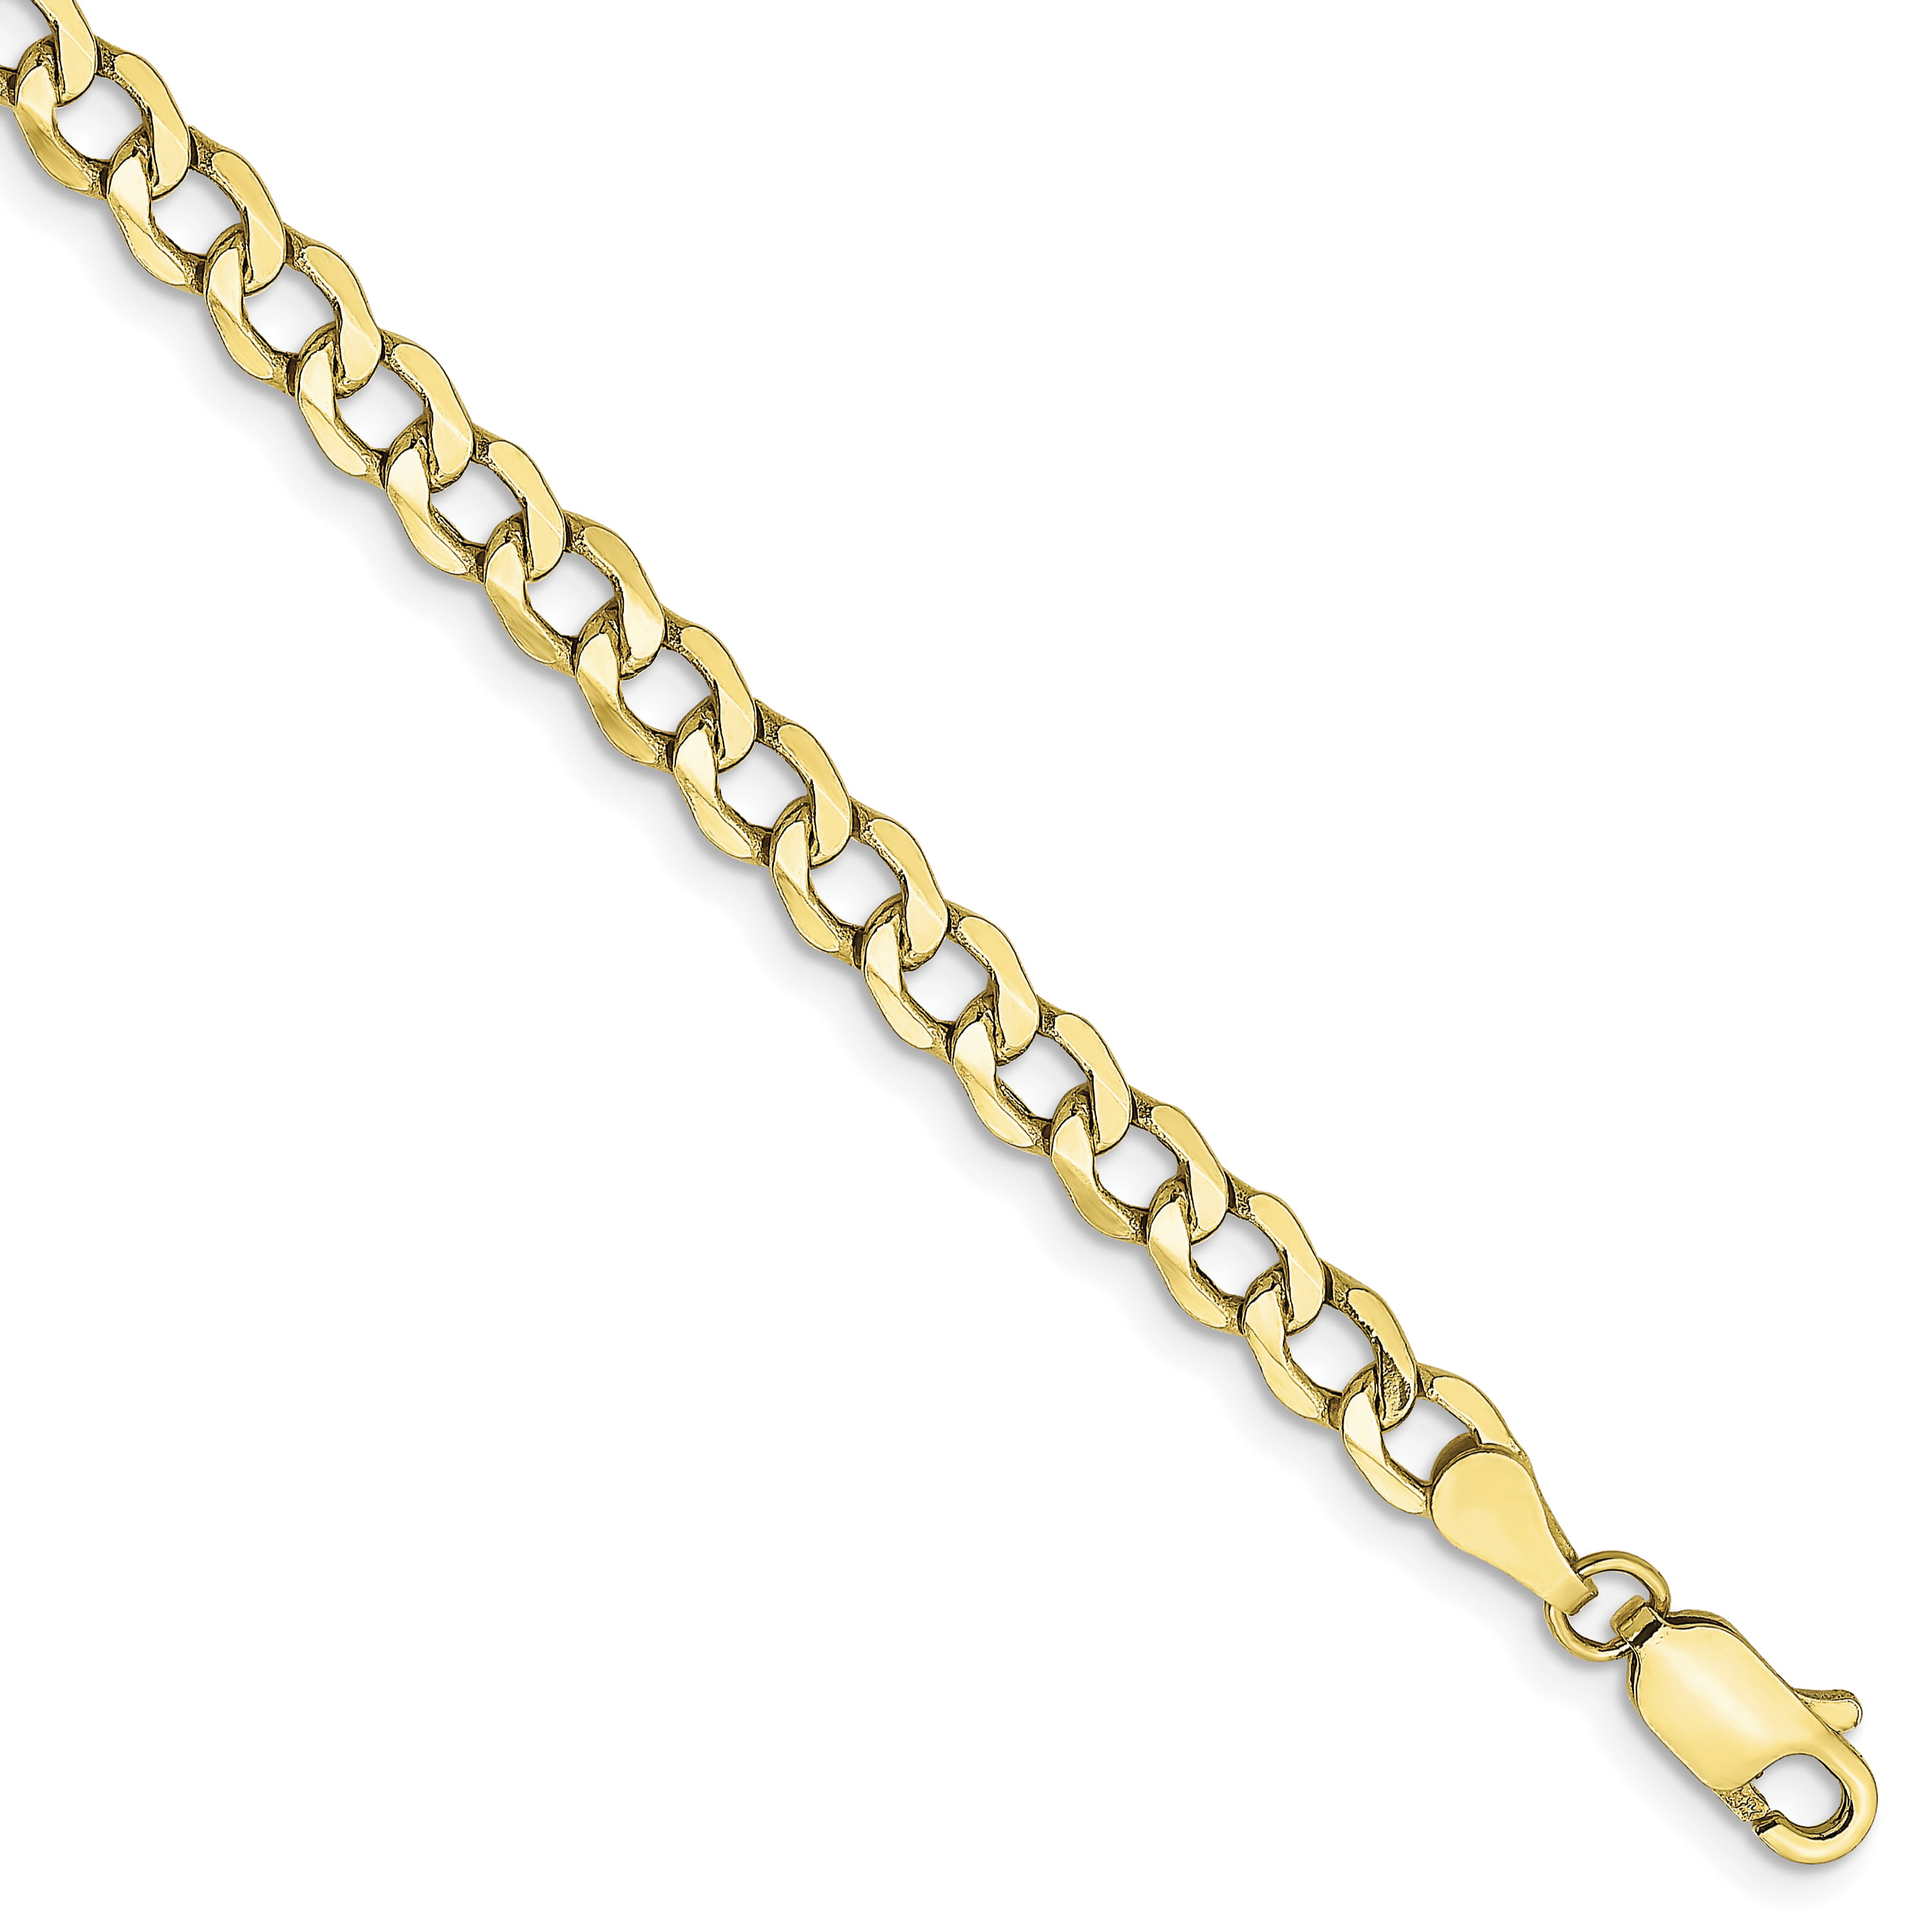 10K Yellow Gold 4.3mm Semi-Solid Curb Link Chain 16 IN 